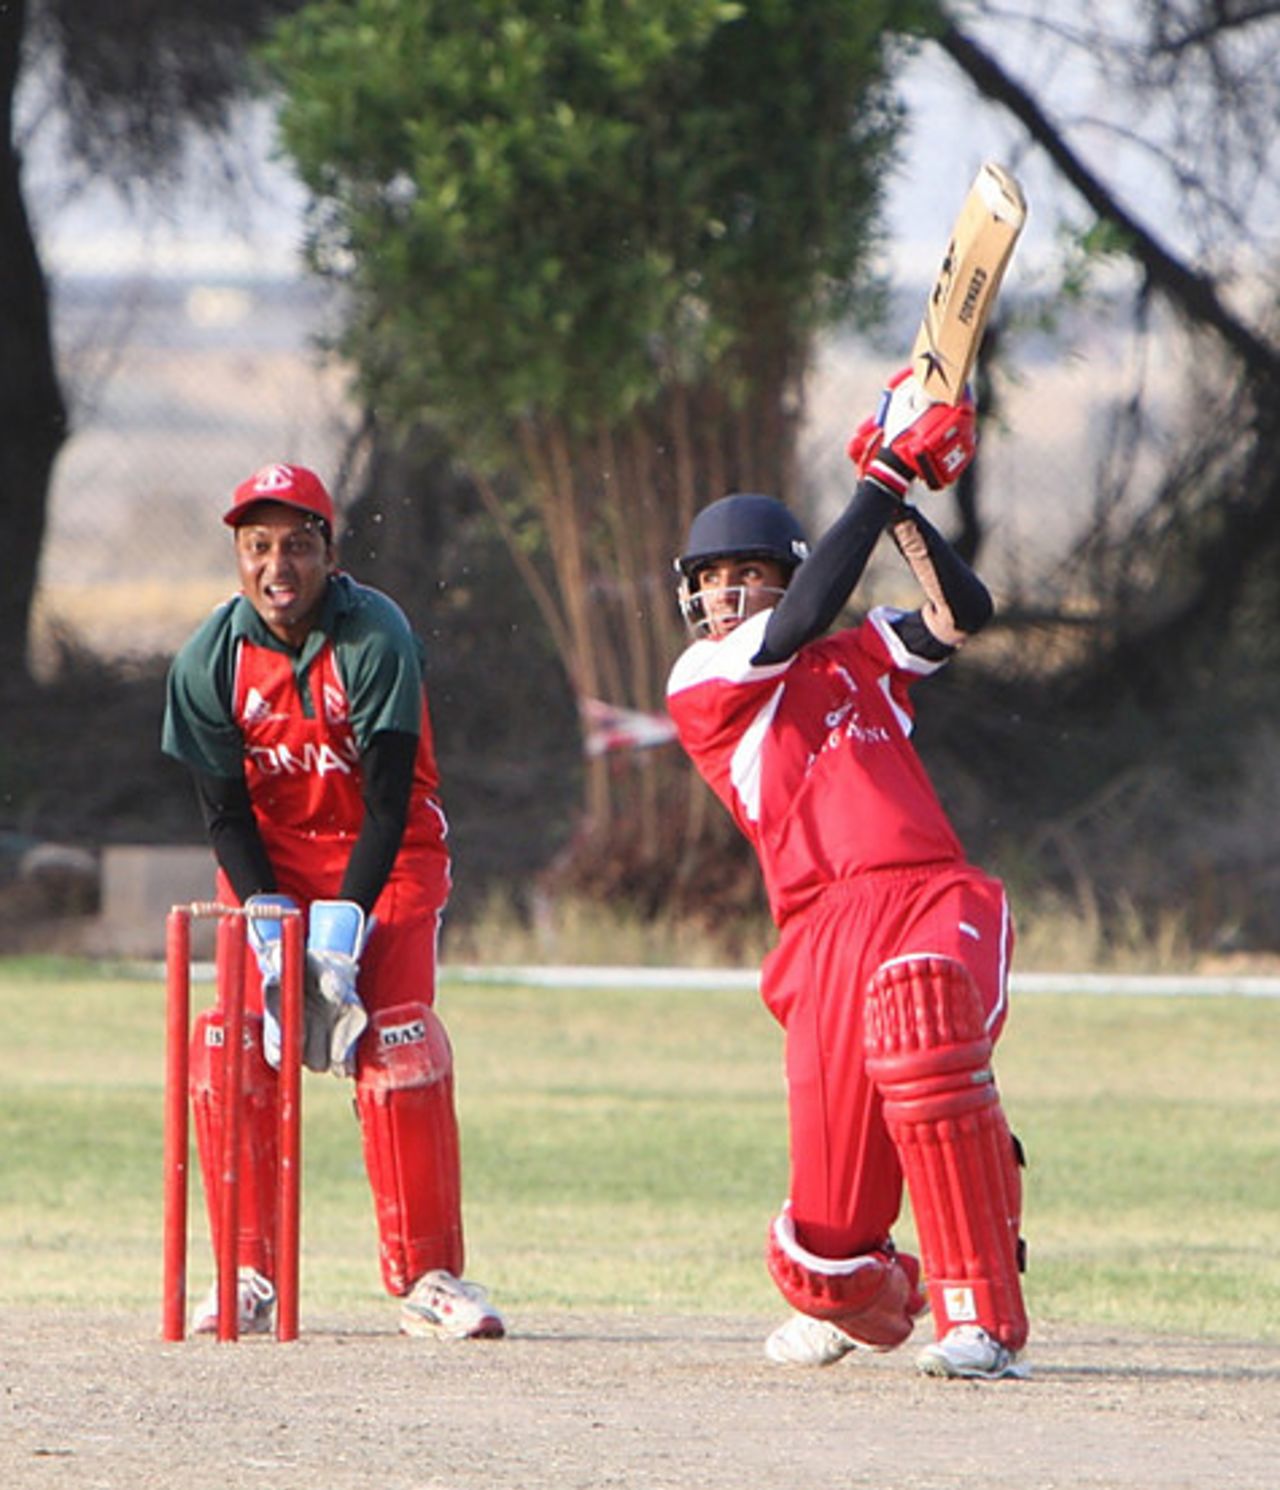 Waqas Barkat smashes a full toss for four against Oman at the ACC Trophy Elite 2010 played in Kuwait